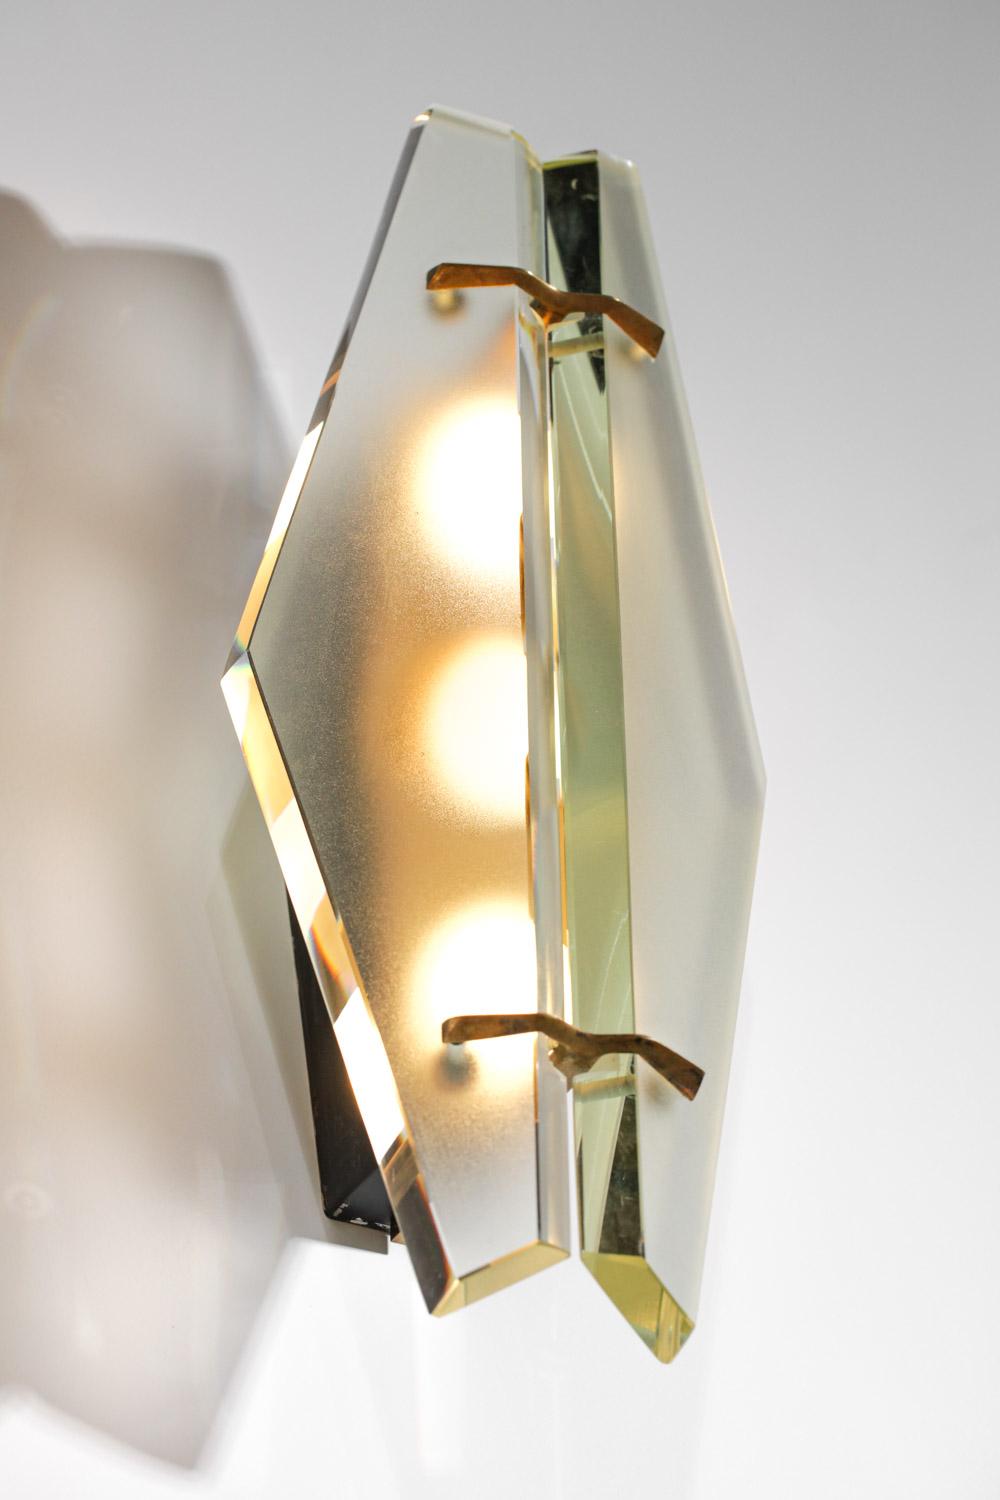 Pair of Italian wall lamps model 1937 of the designer Max Ingrand for the house Fontana Arte of the 60s. Structure in bronze and black lacquered steel (original paint) with a diffuser composed of two frosted glass slabs assembled by a solid brass